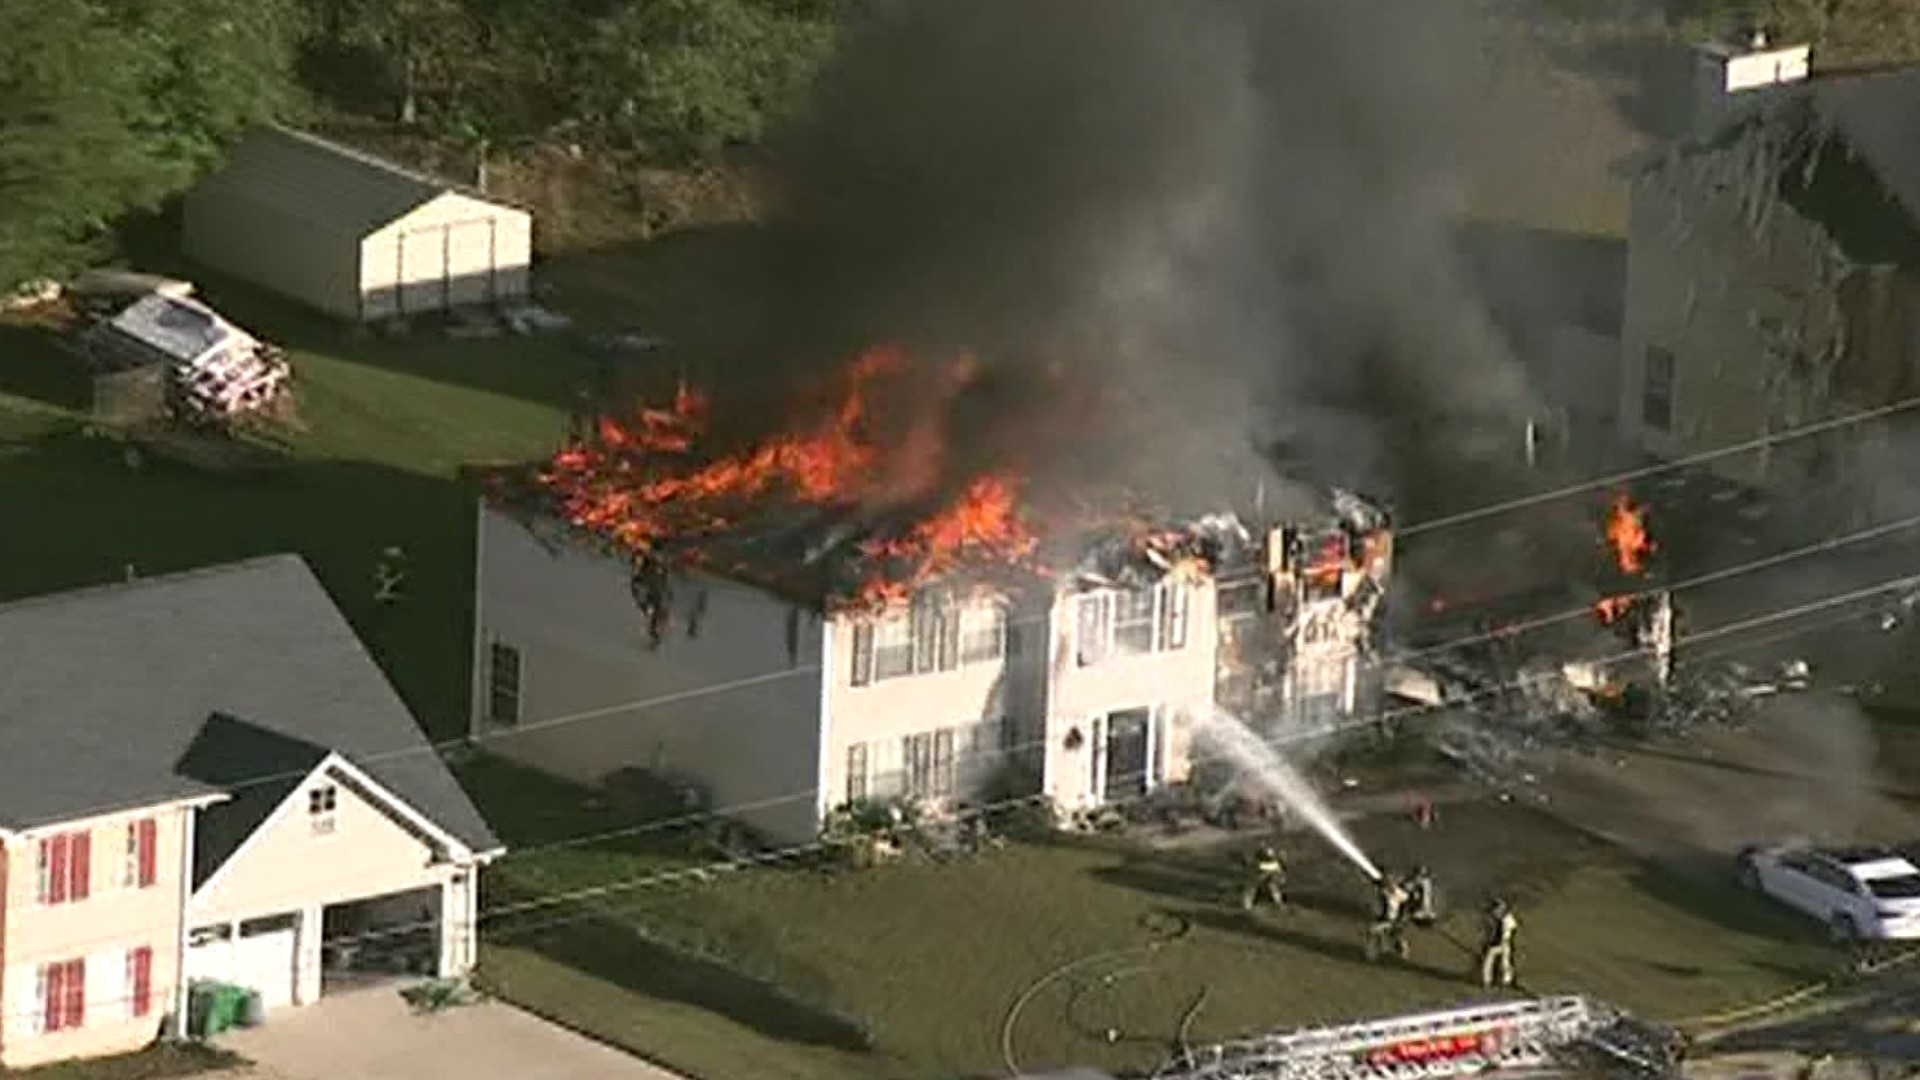 The fire is at a two-story home in DeKalb County.